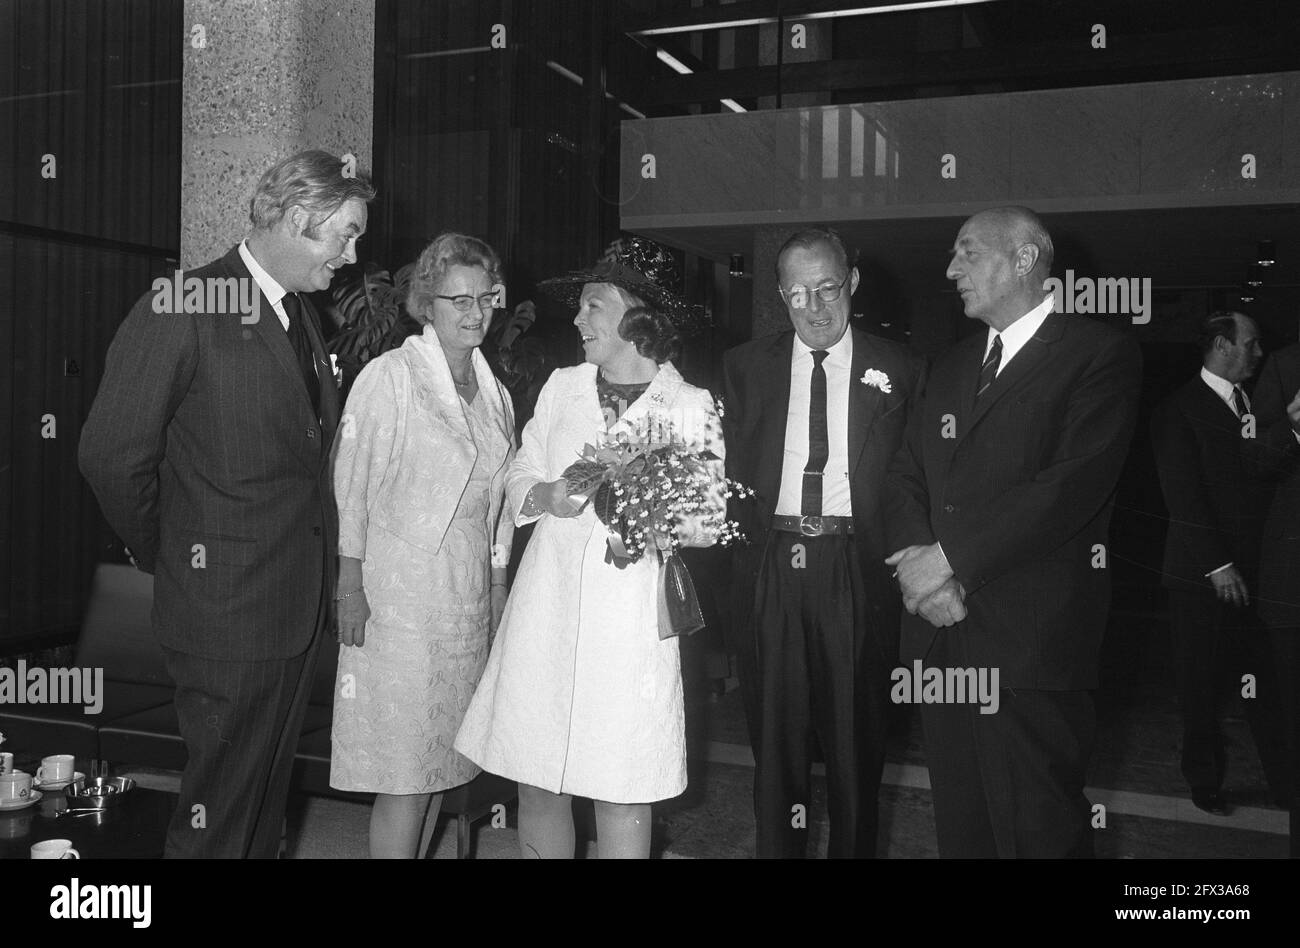 Congress of Foundation Europeenne de la Culture on the city and its inhabitants in 2000 in Doelen, Rotterdam, May 25, 1970, congresses, princes, princesses, The Netherlands, 20th century press agency photo, news to remember, documentary, historic photography 1945-1990, visual stories, human history of the Twentieth Century, capturing moments in time Stock Photo